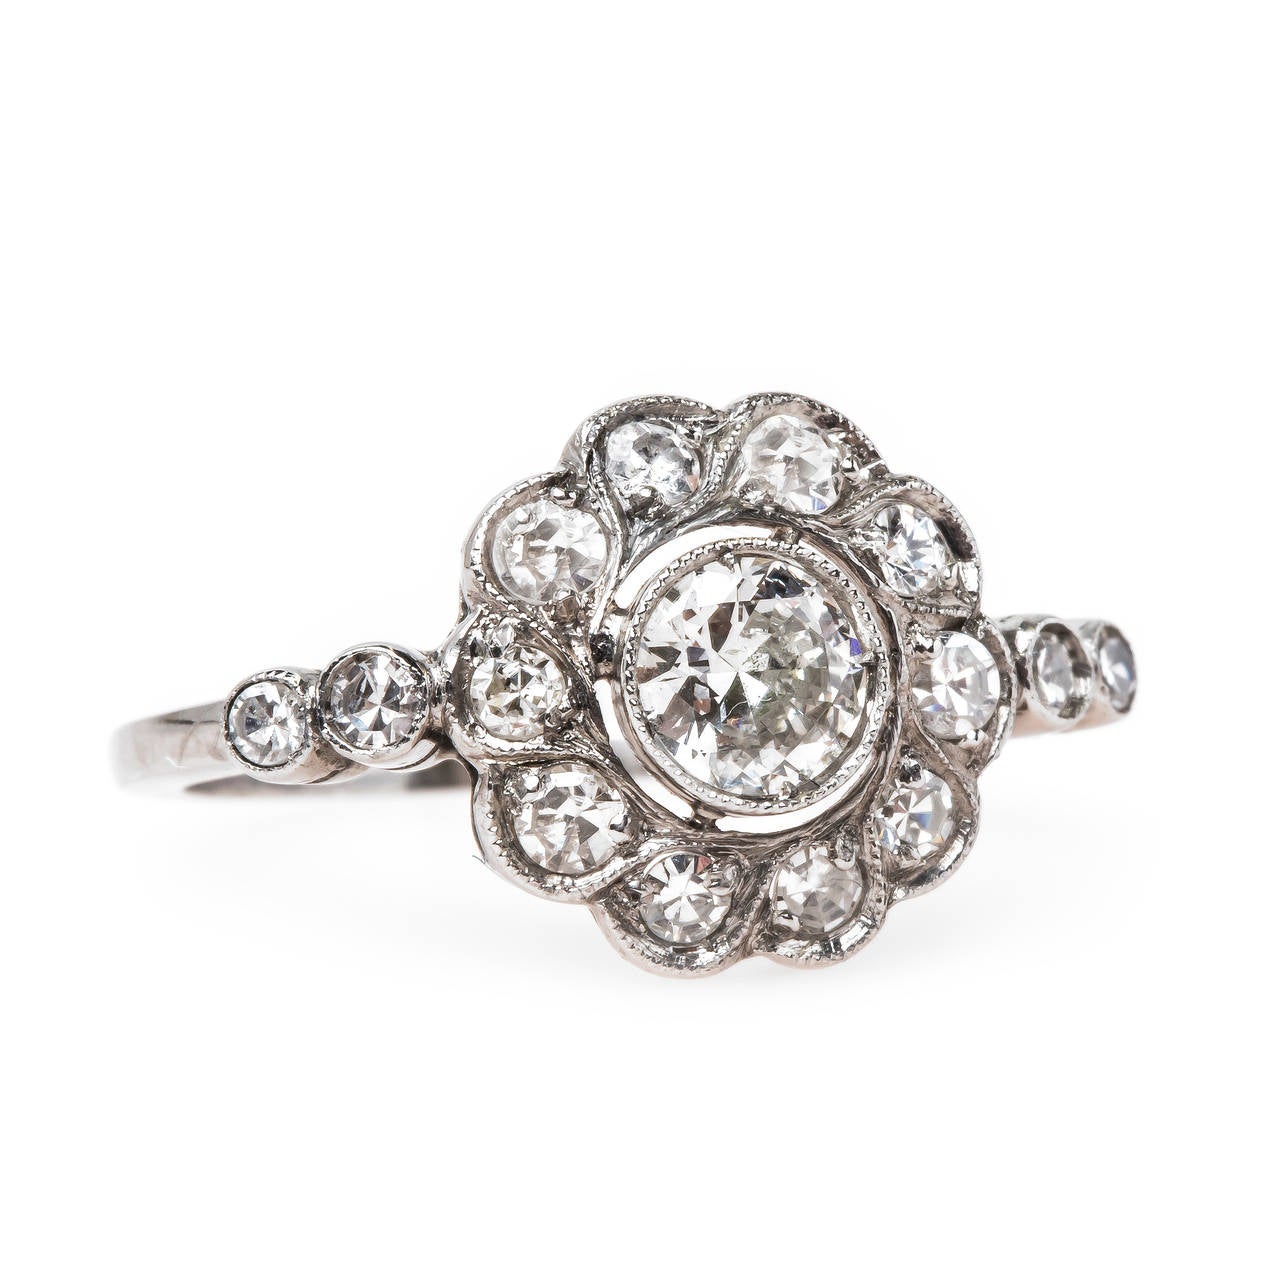 Old Portsmouth is an alluring authentic Edwardian era (circa 1910) platinum halo style ring centering a single bezel set Old European Cut diamond gauged at 0.25ct graded G-H color and VS2 clarity. A lovely halo of ten Single Cut diamonds totaling